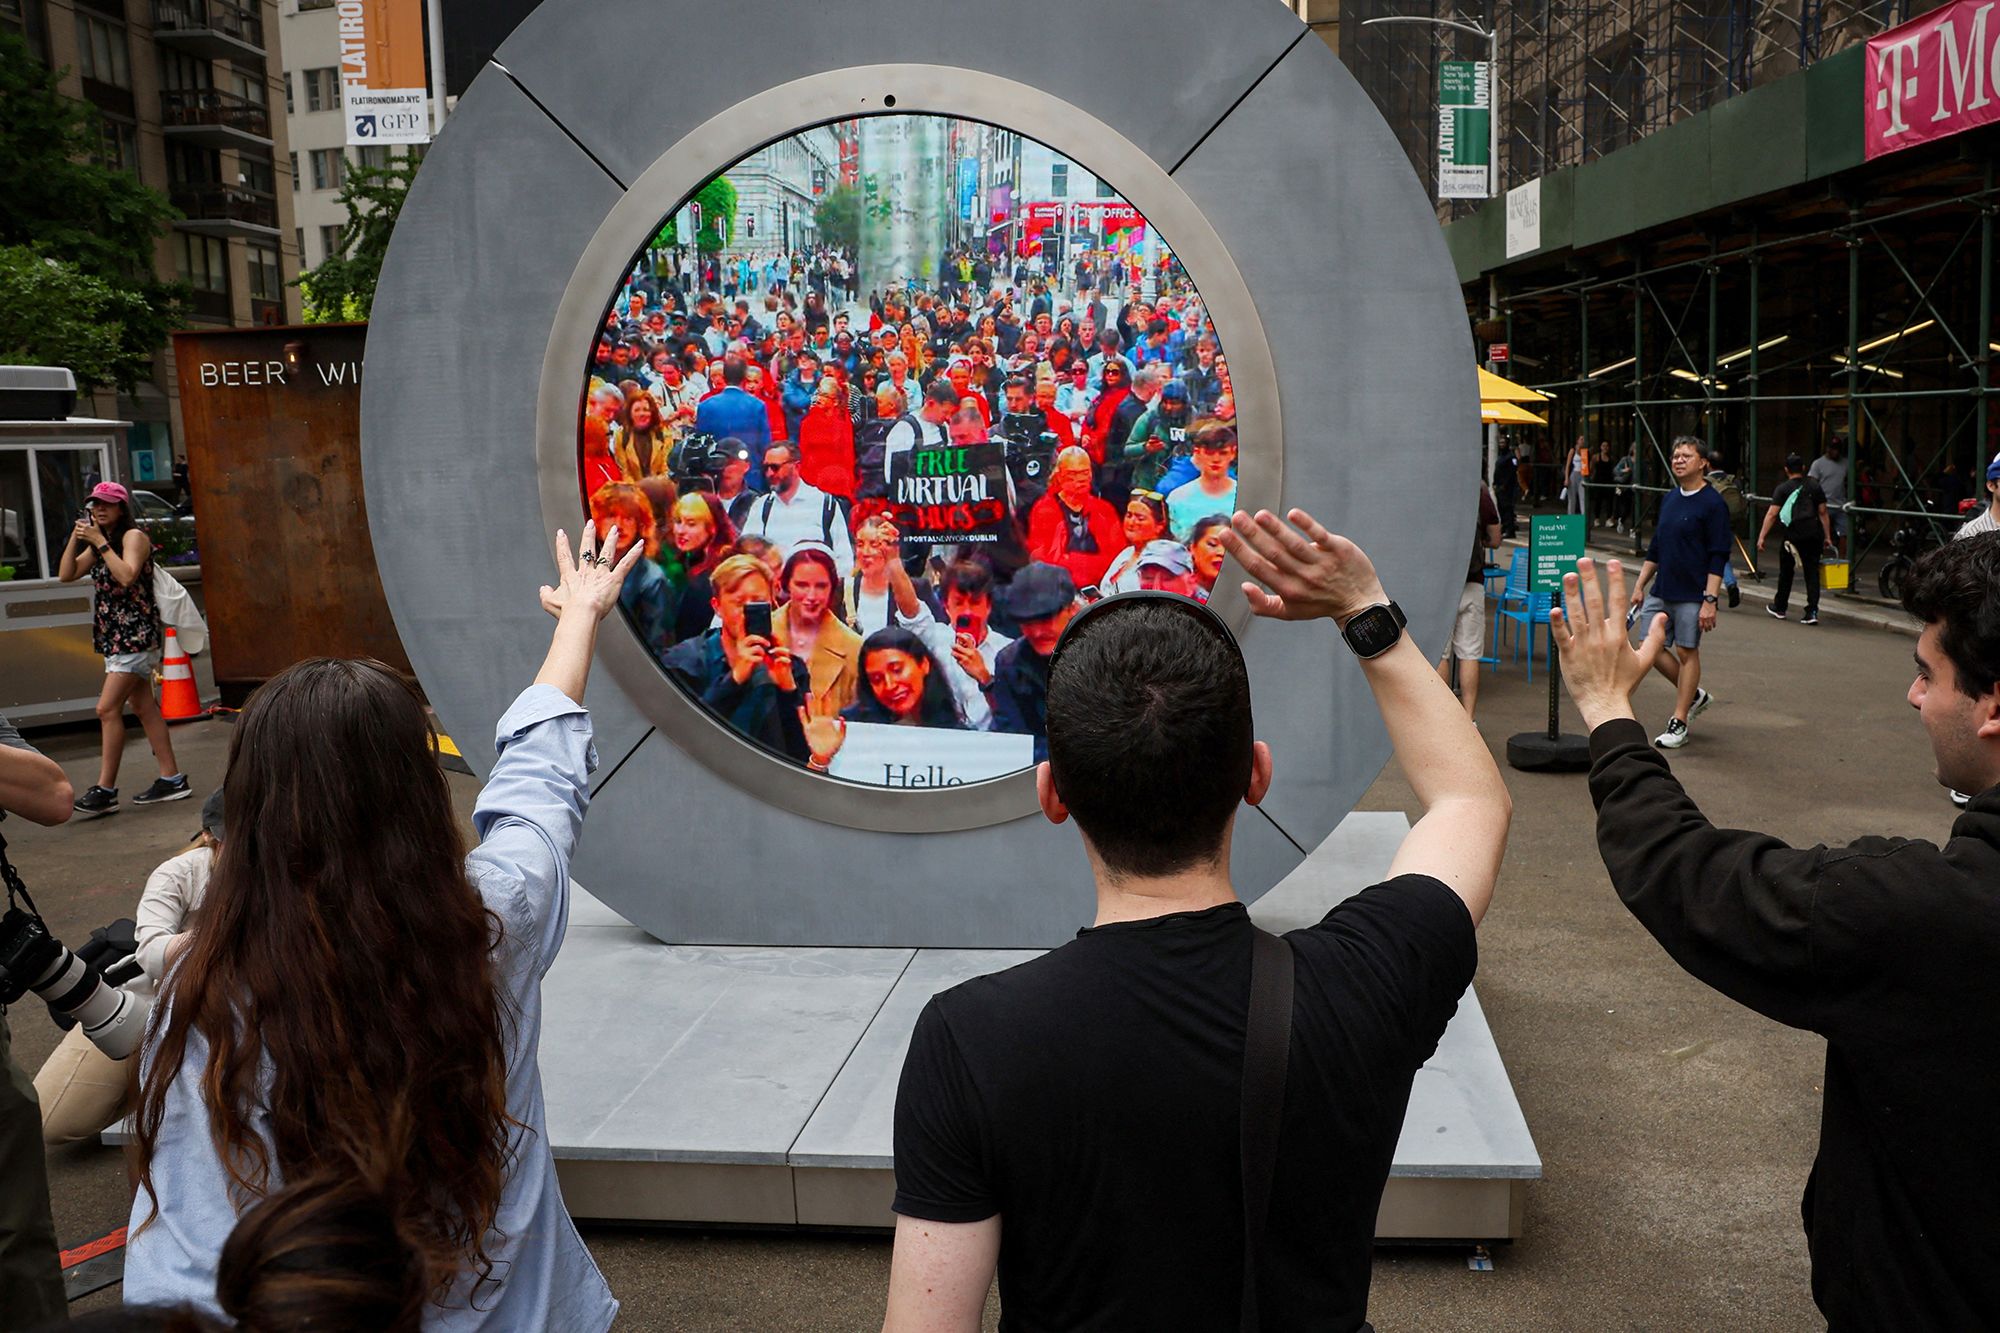 People in New York City wave to Dubliners on the other side of the installation.